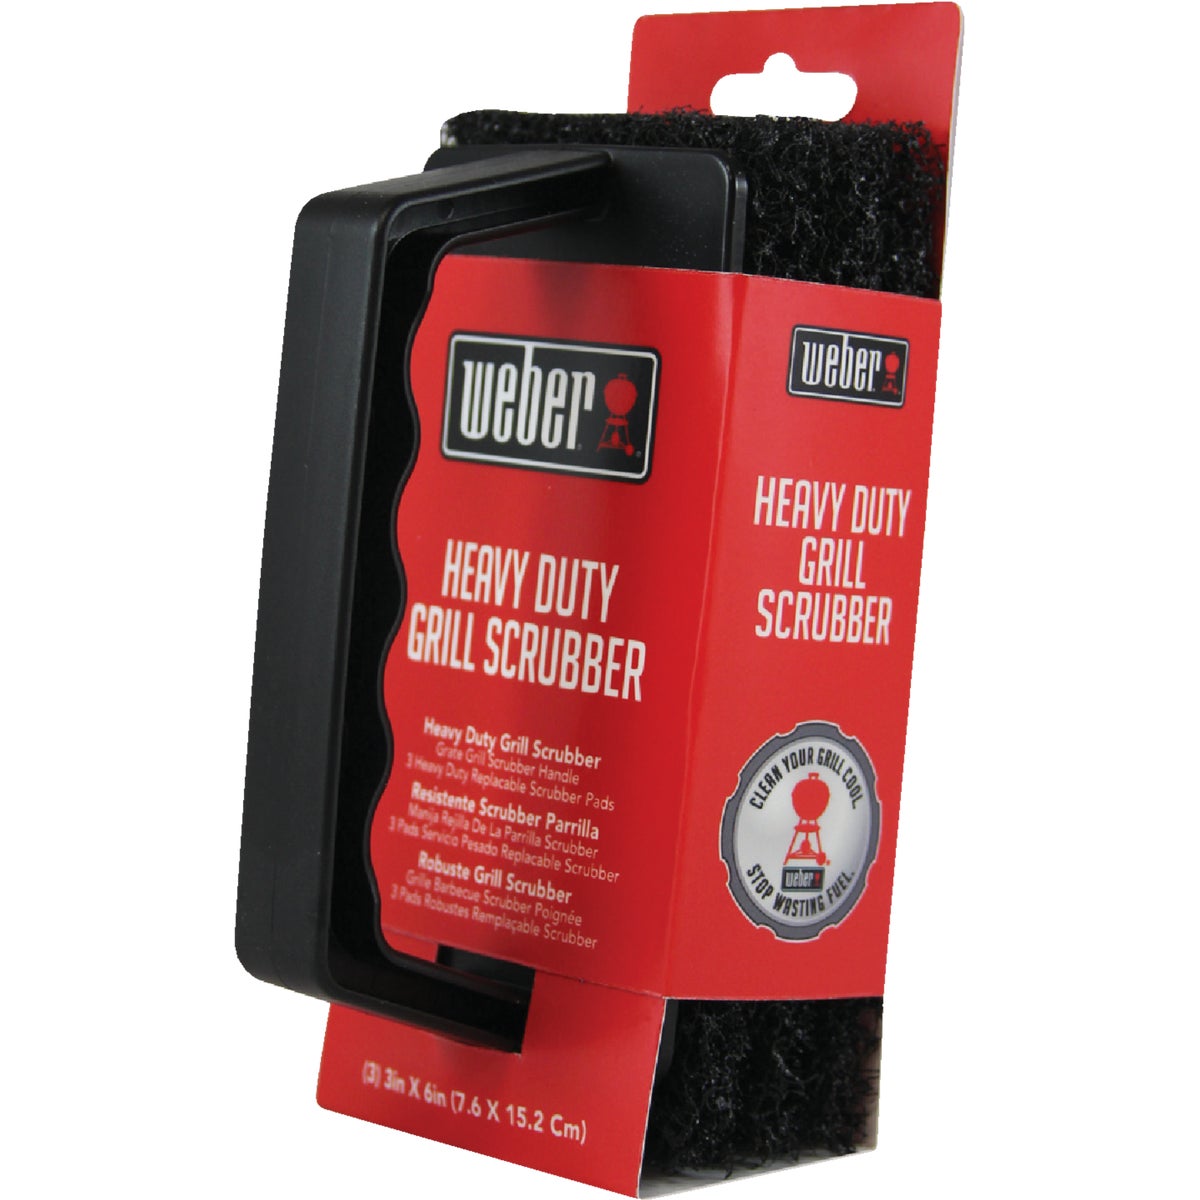 Item 800509, The Weber Heavy Duty Grate Grill Scrubber quickly and easily removes burnt-